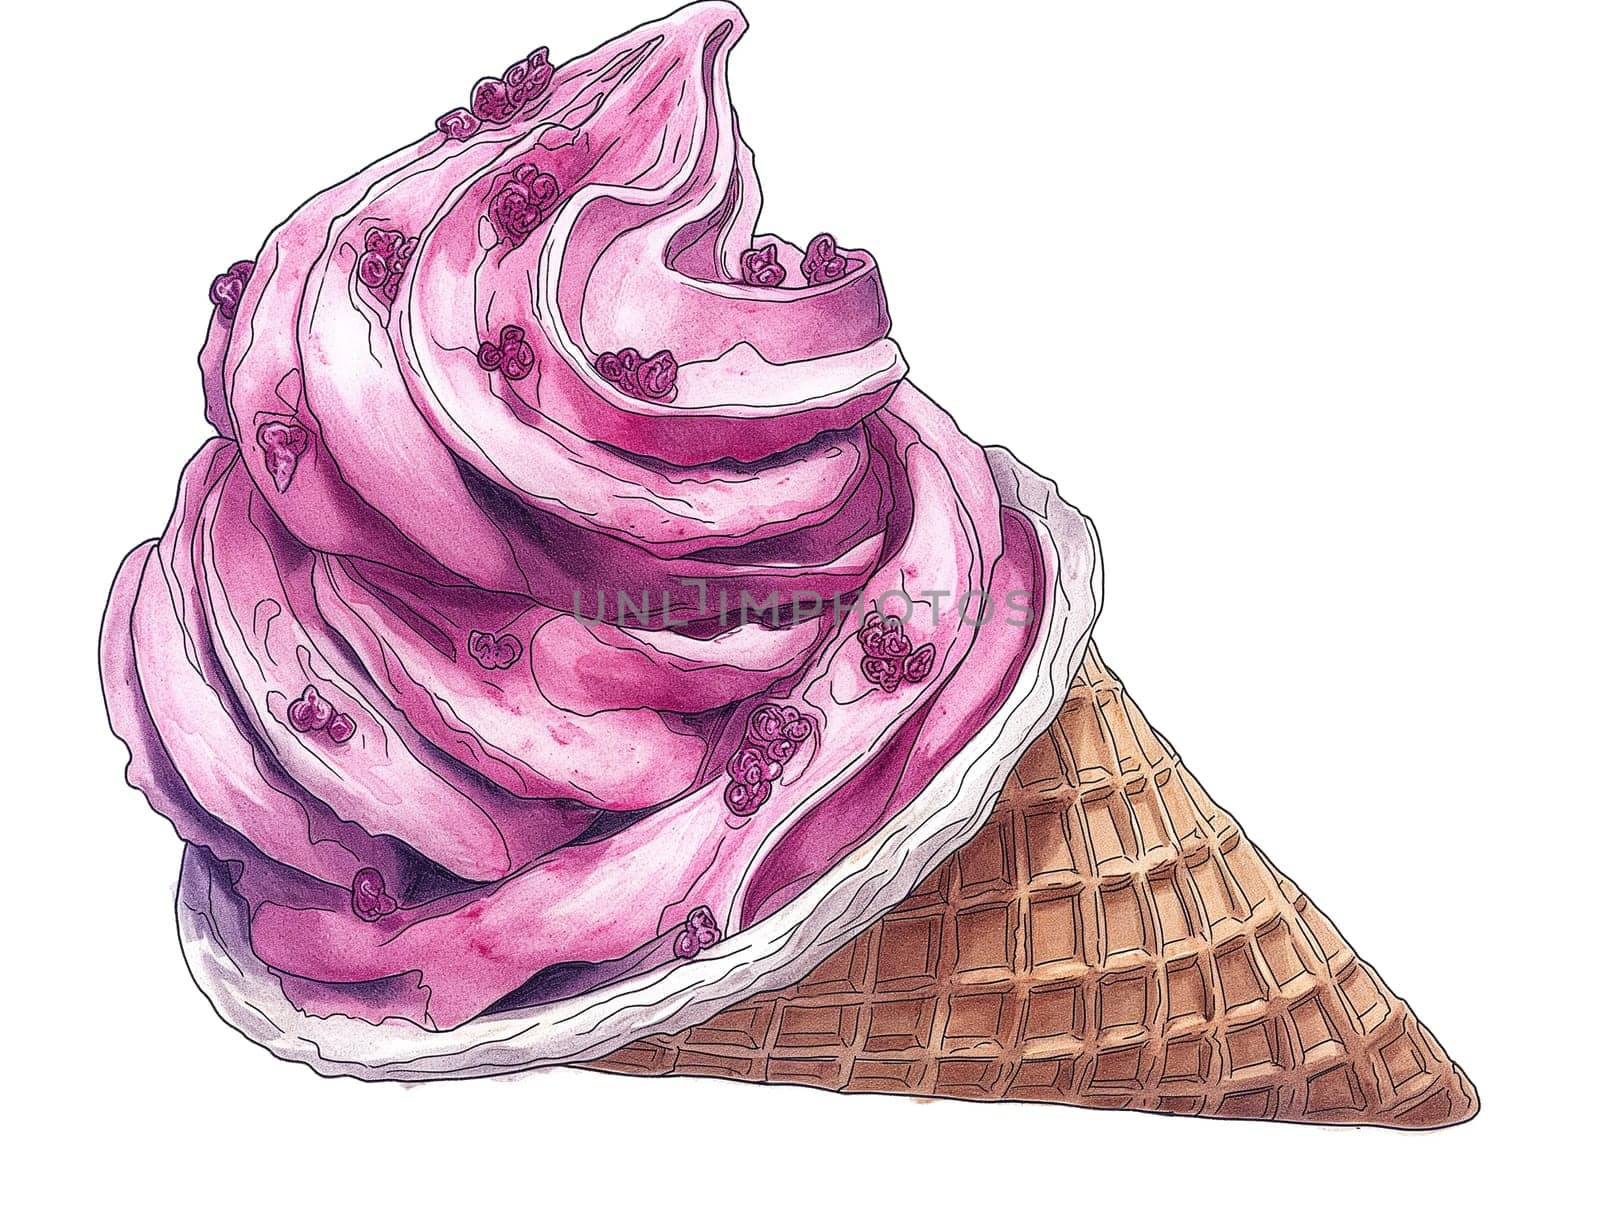 Soft serve strawberry ice cream cone held against a grey background. by Hype2art